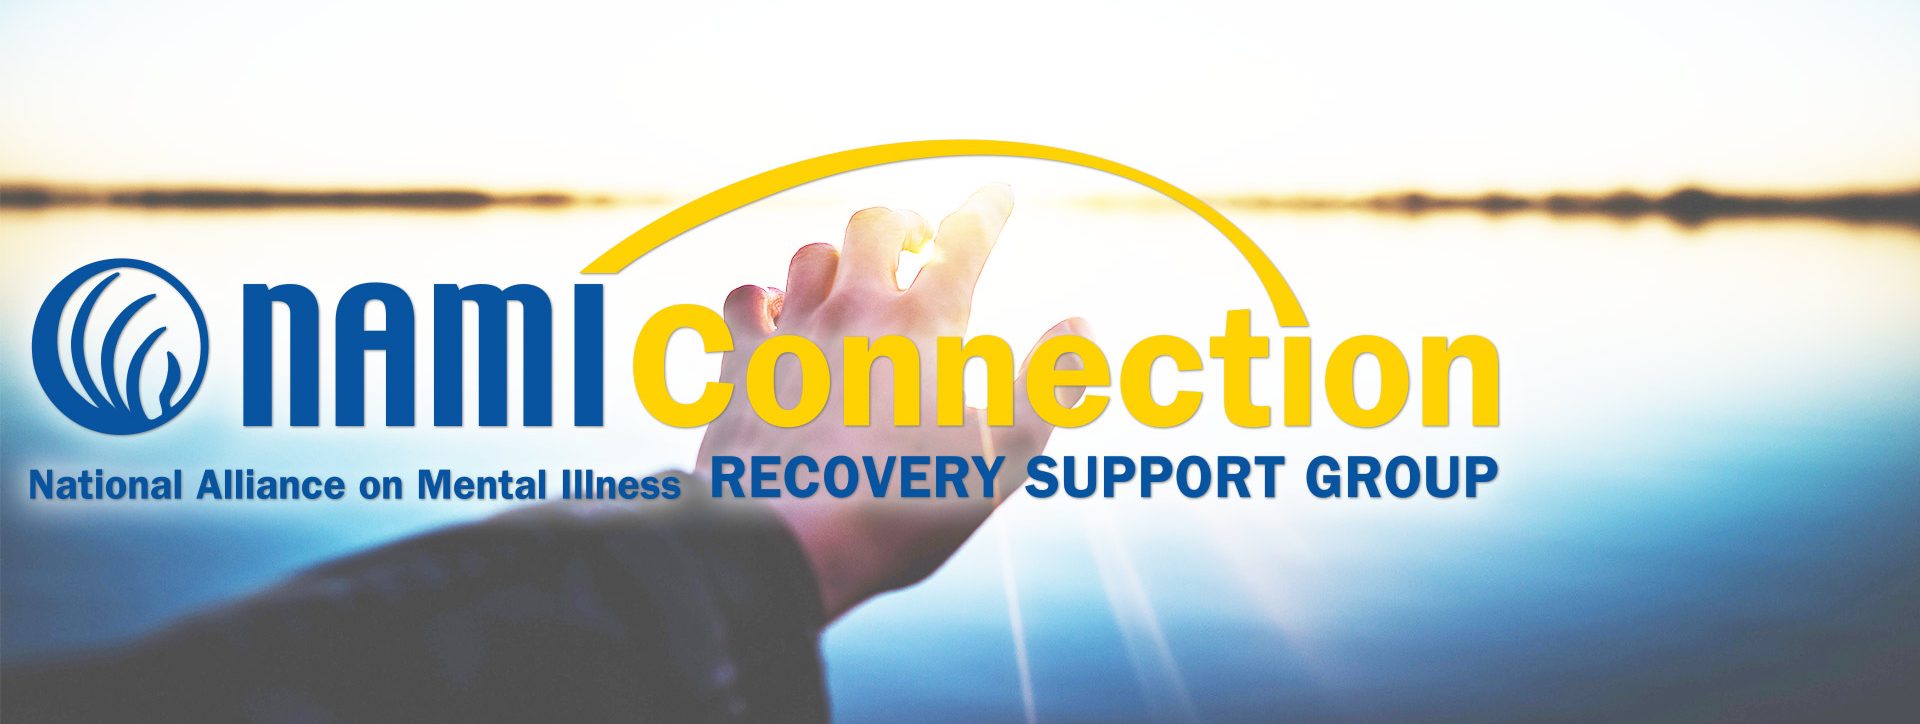 NAMI Connection Recovery Support Group